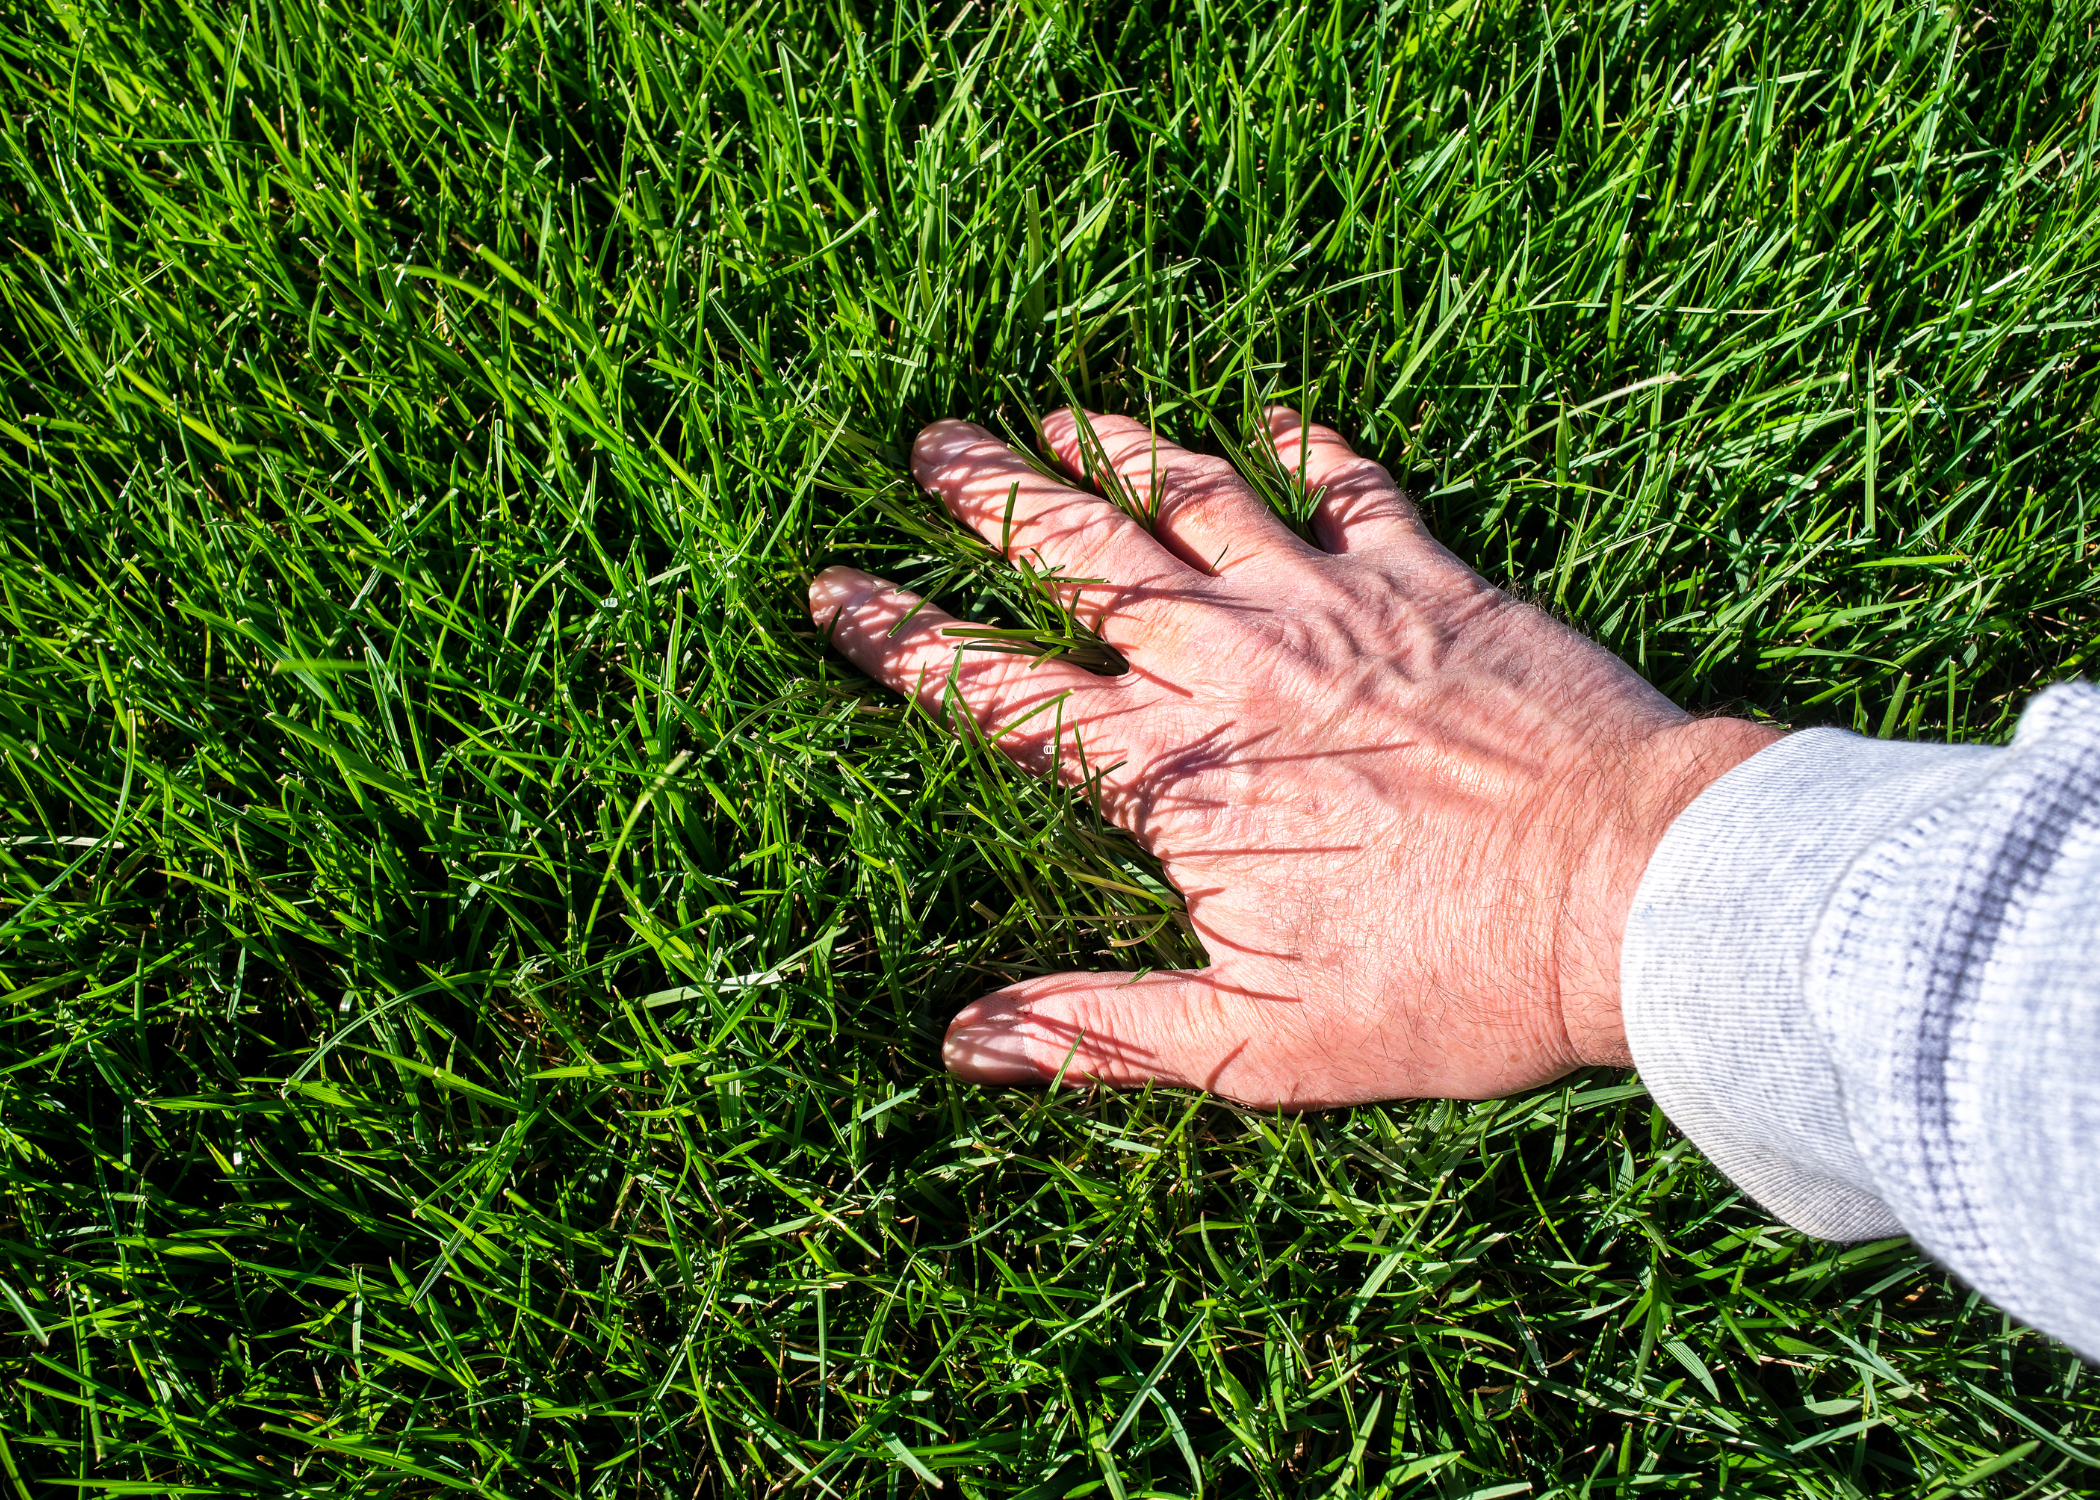 A person's hand in green grass.